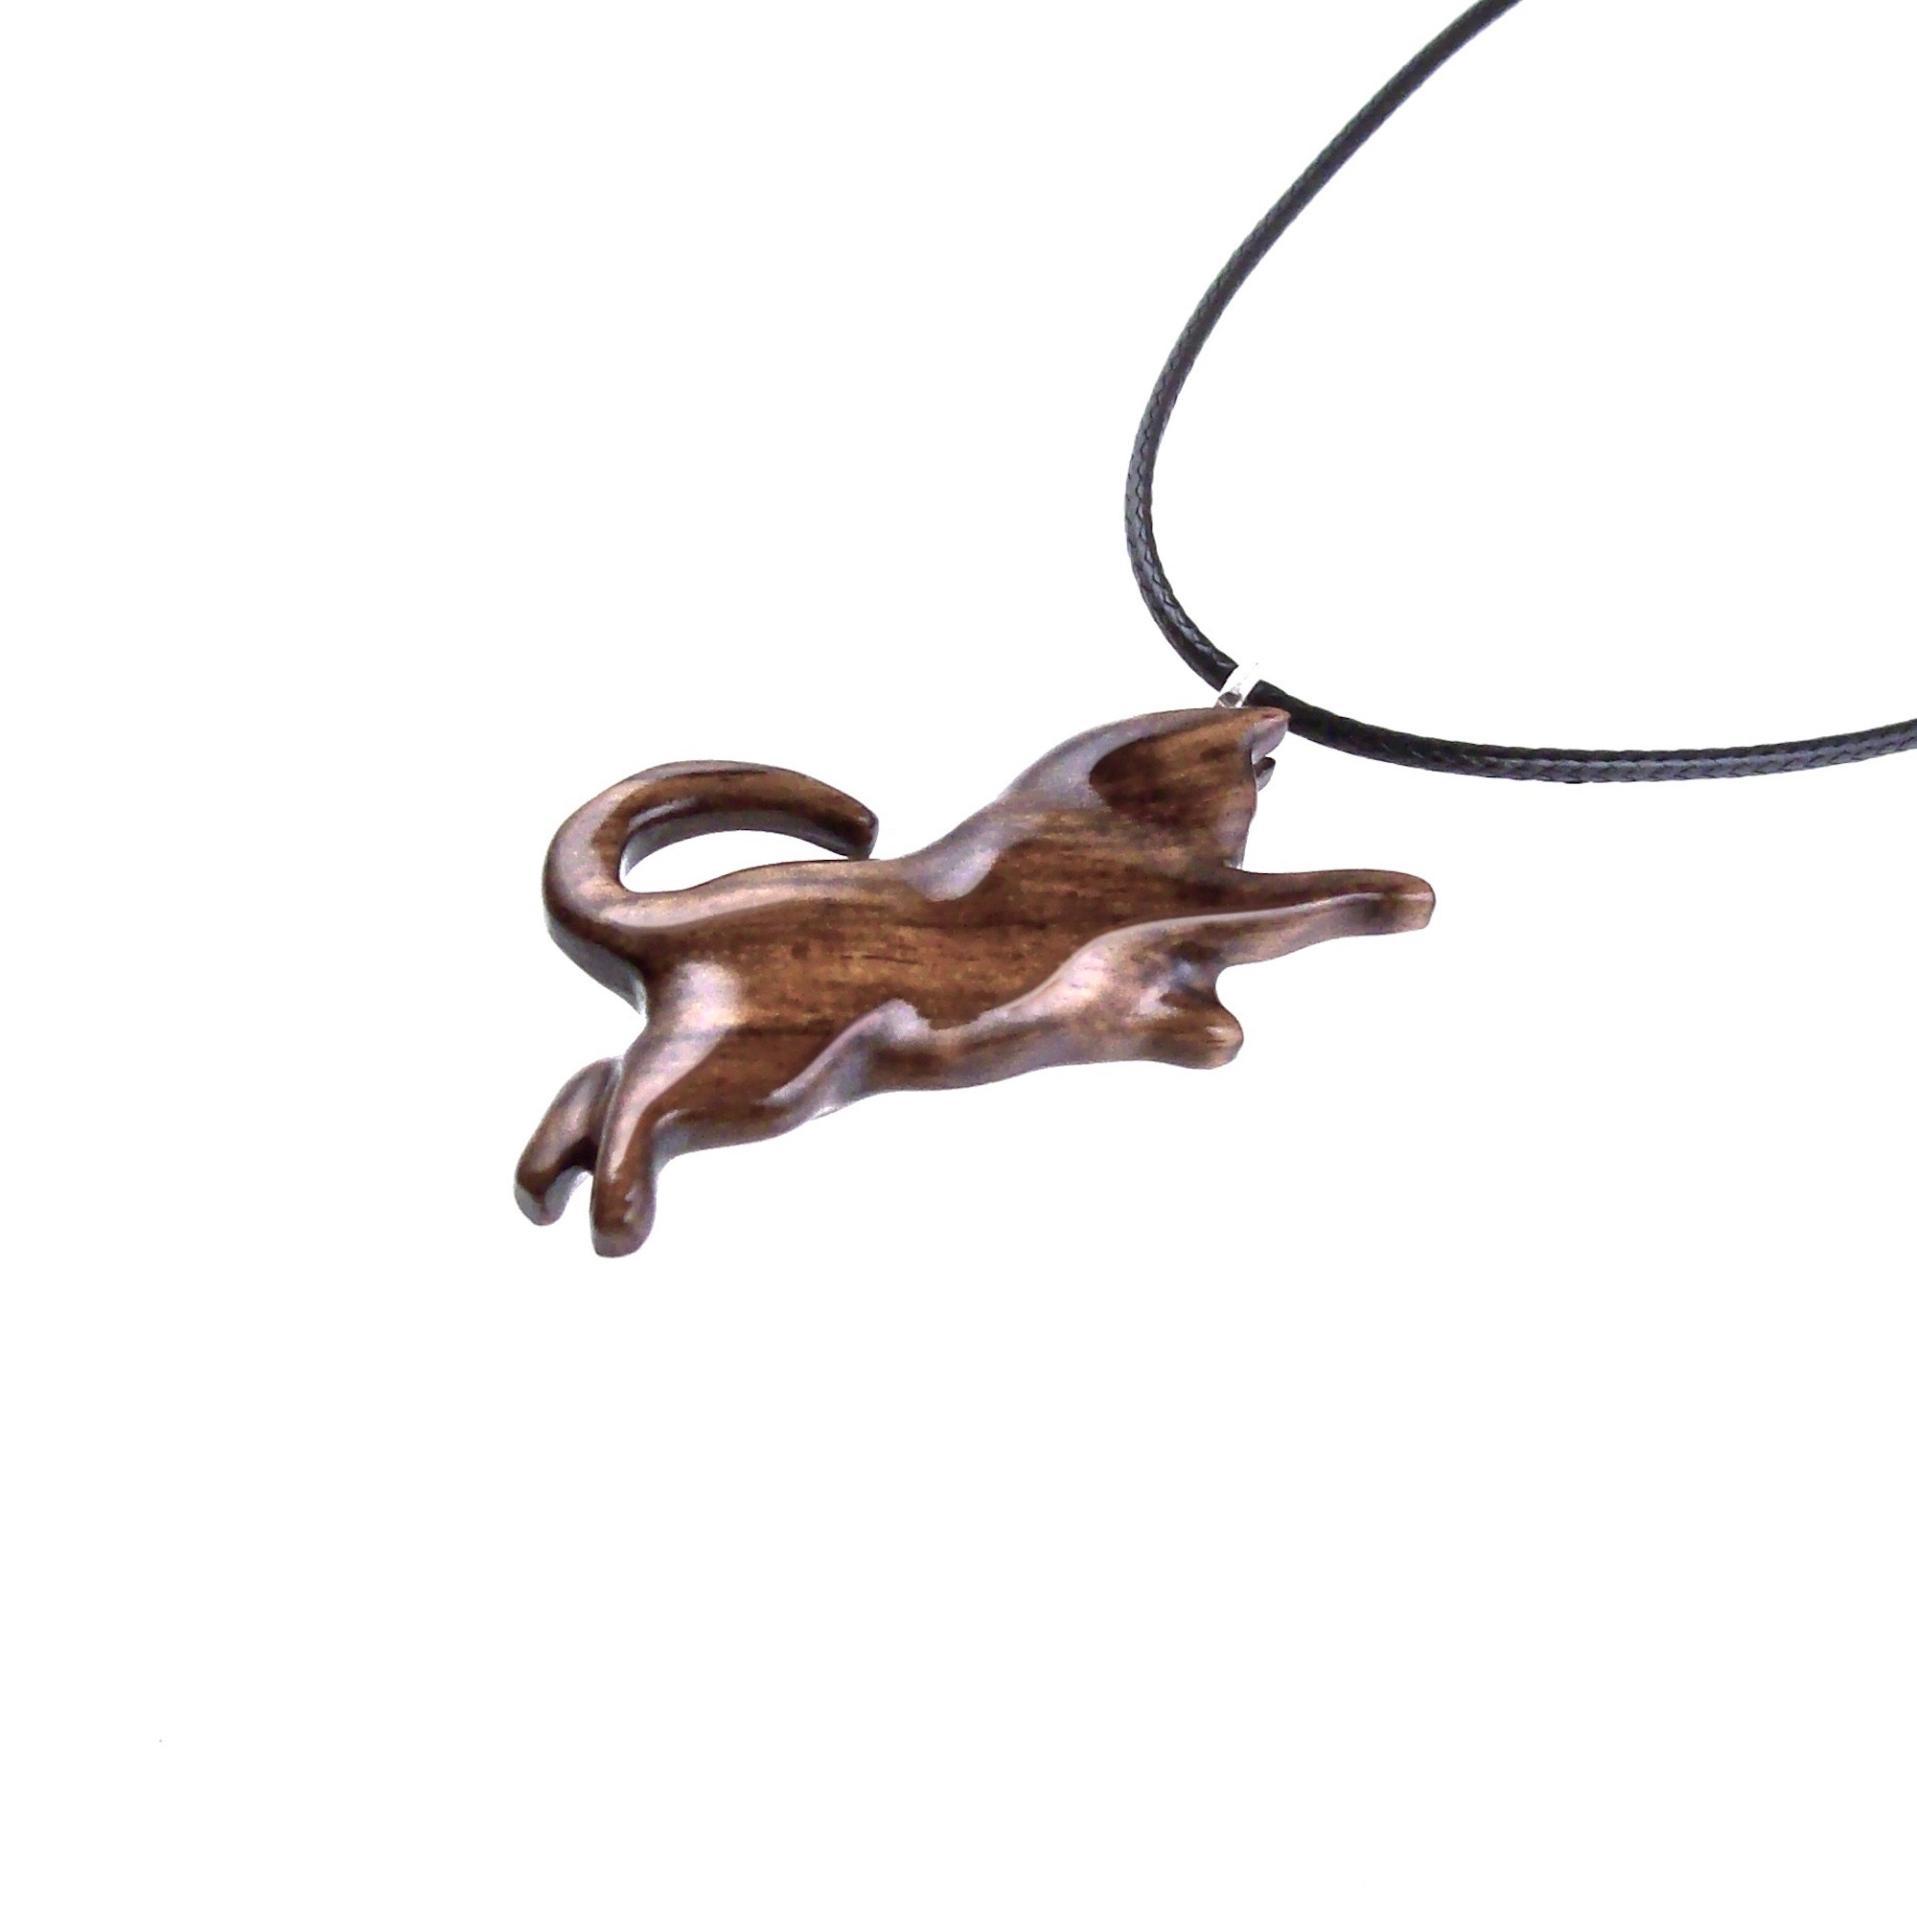 Kitten Necklace, Hand Carved Wooden Cat Pendant, Pet Animal Necklace, Handmade Wood Jewelry, One of a Kind Gift